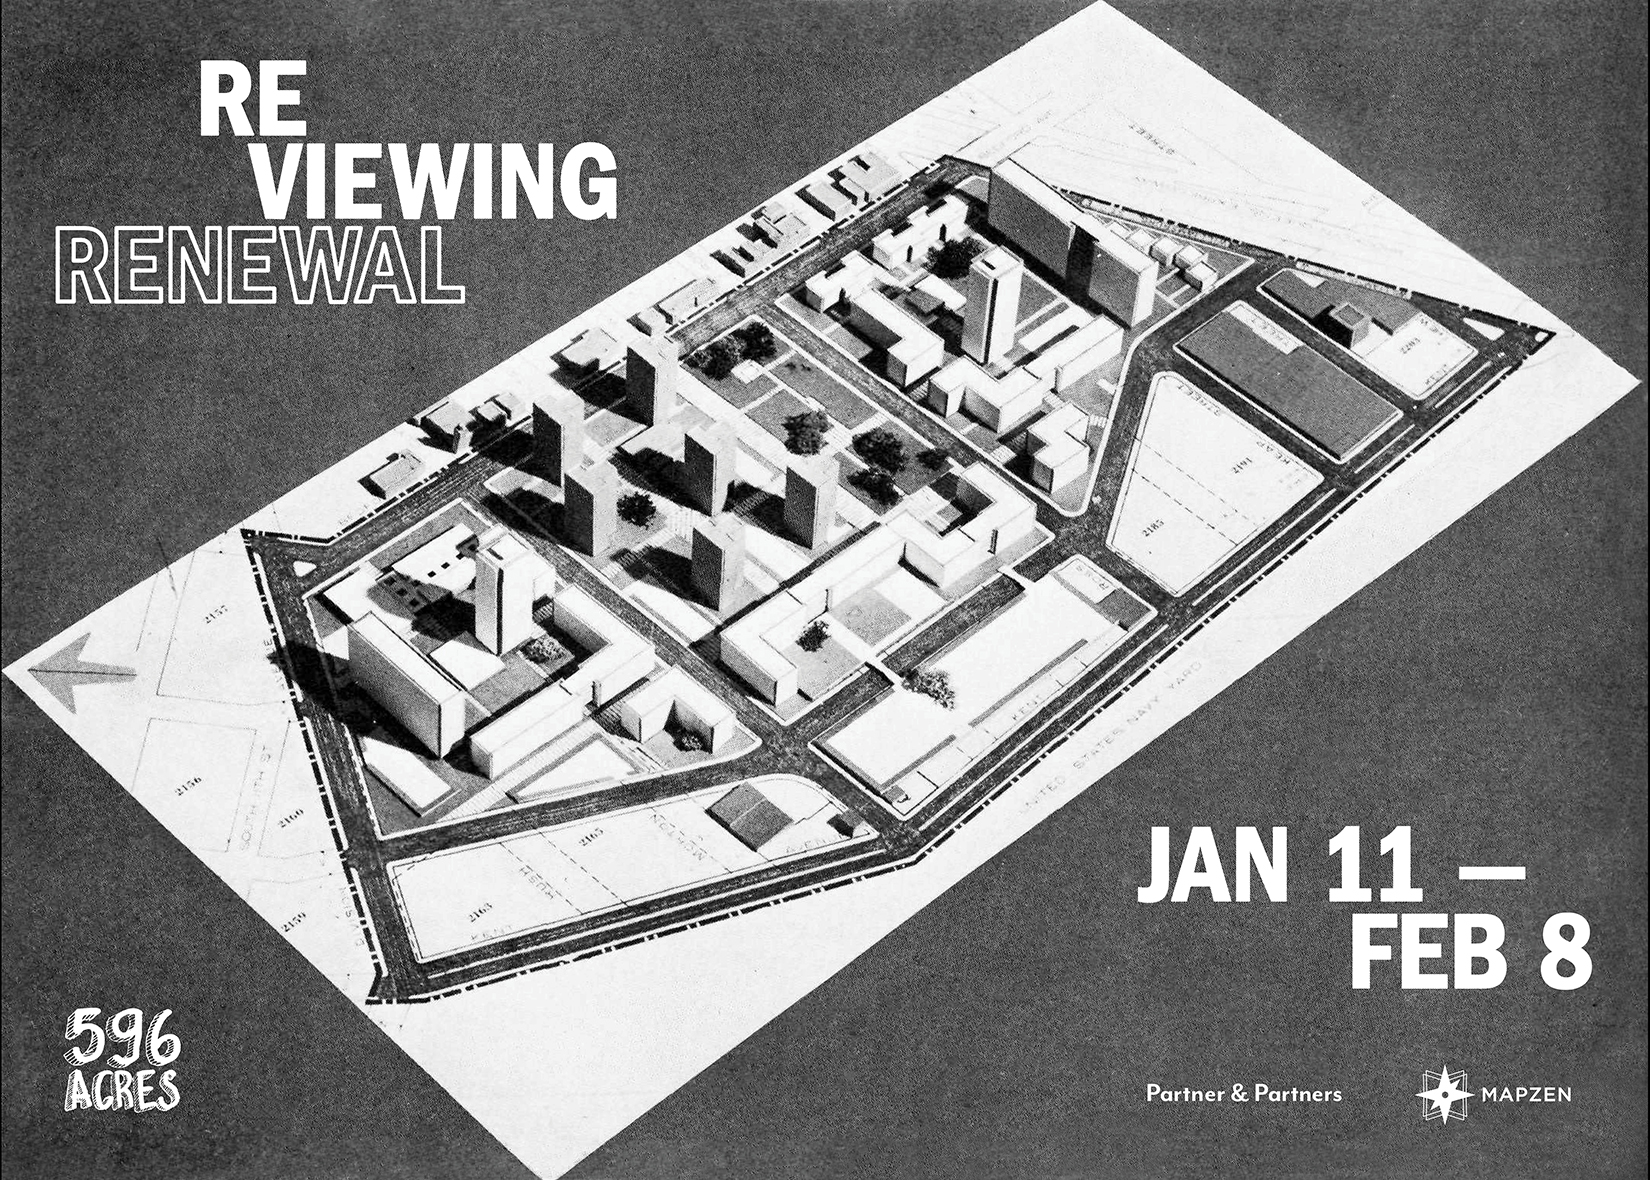 A static gray, urban planning poster. At the center, in a diagonal slant, is a black and white, three-dimensional map of a housing development. In the top left,in white font, is the title “Reviewing Renewal”. In the opposite corner is the date, in white font, reading “ Jan 11 - Feb 8”. At the bottom are sponsor logos for “596 Acres”, “Partner & Partners”, and “Mapzen”.